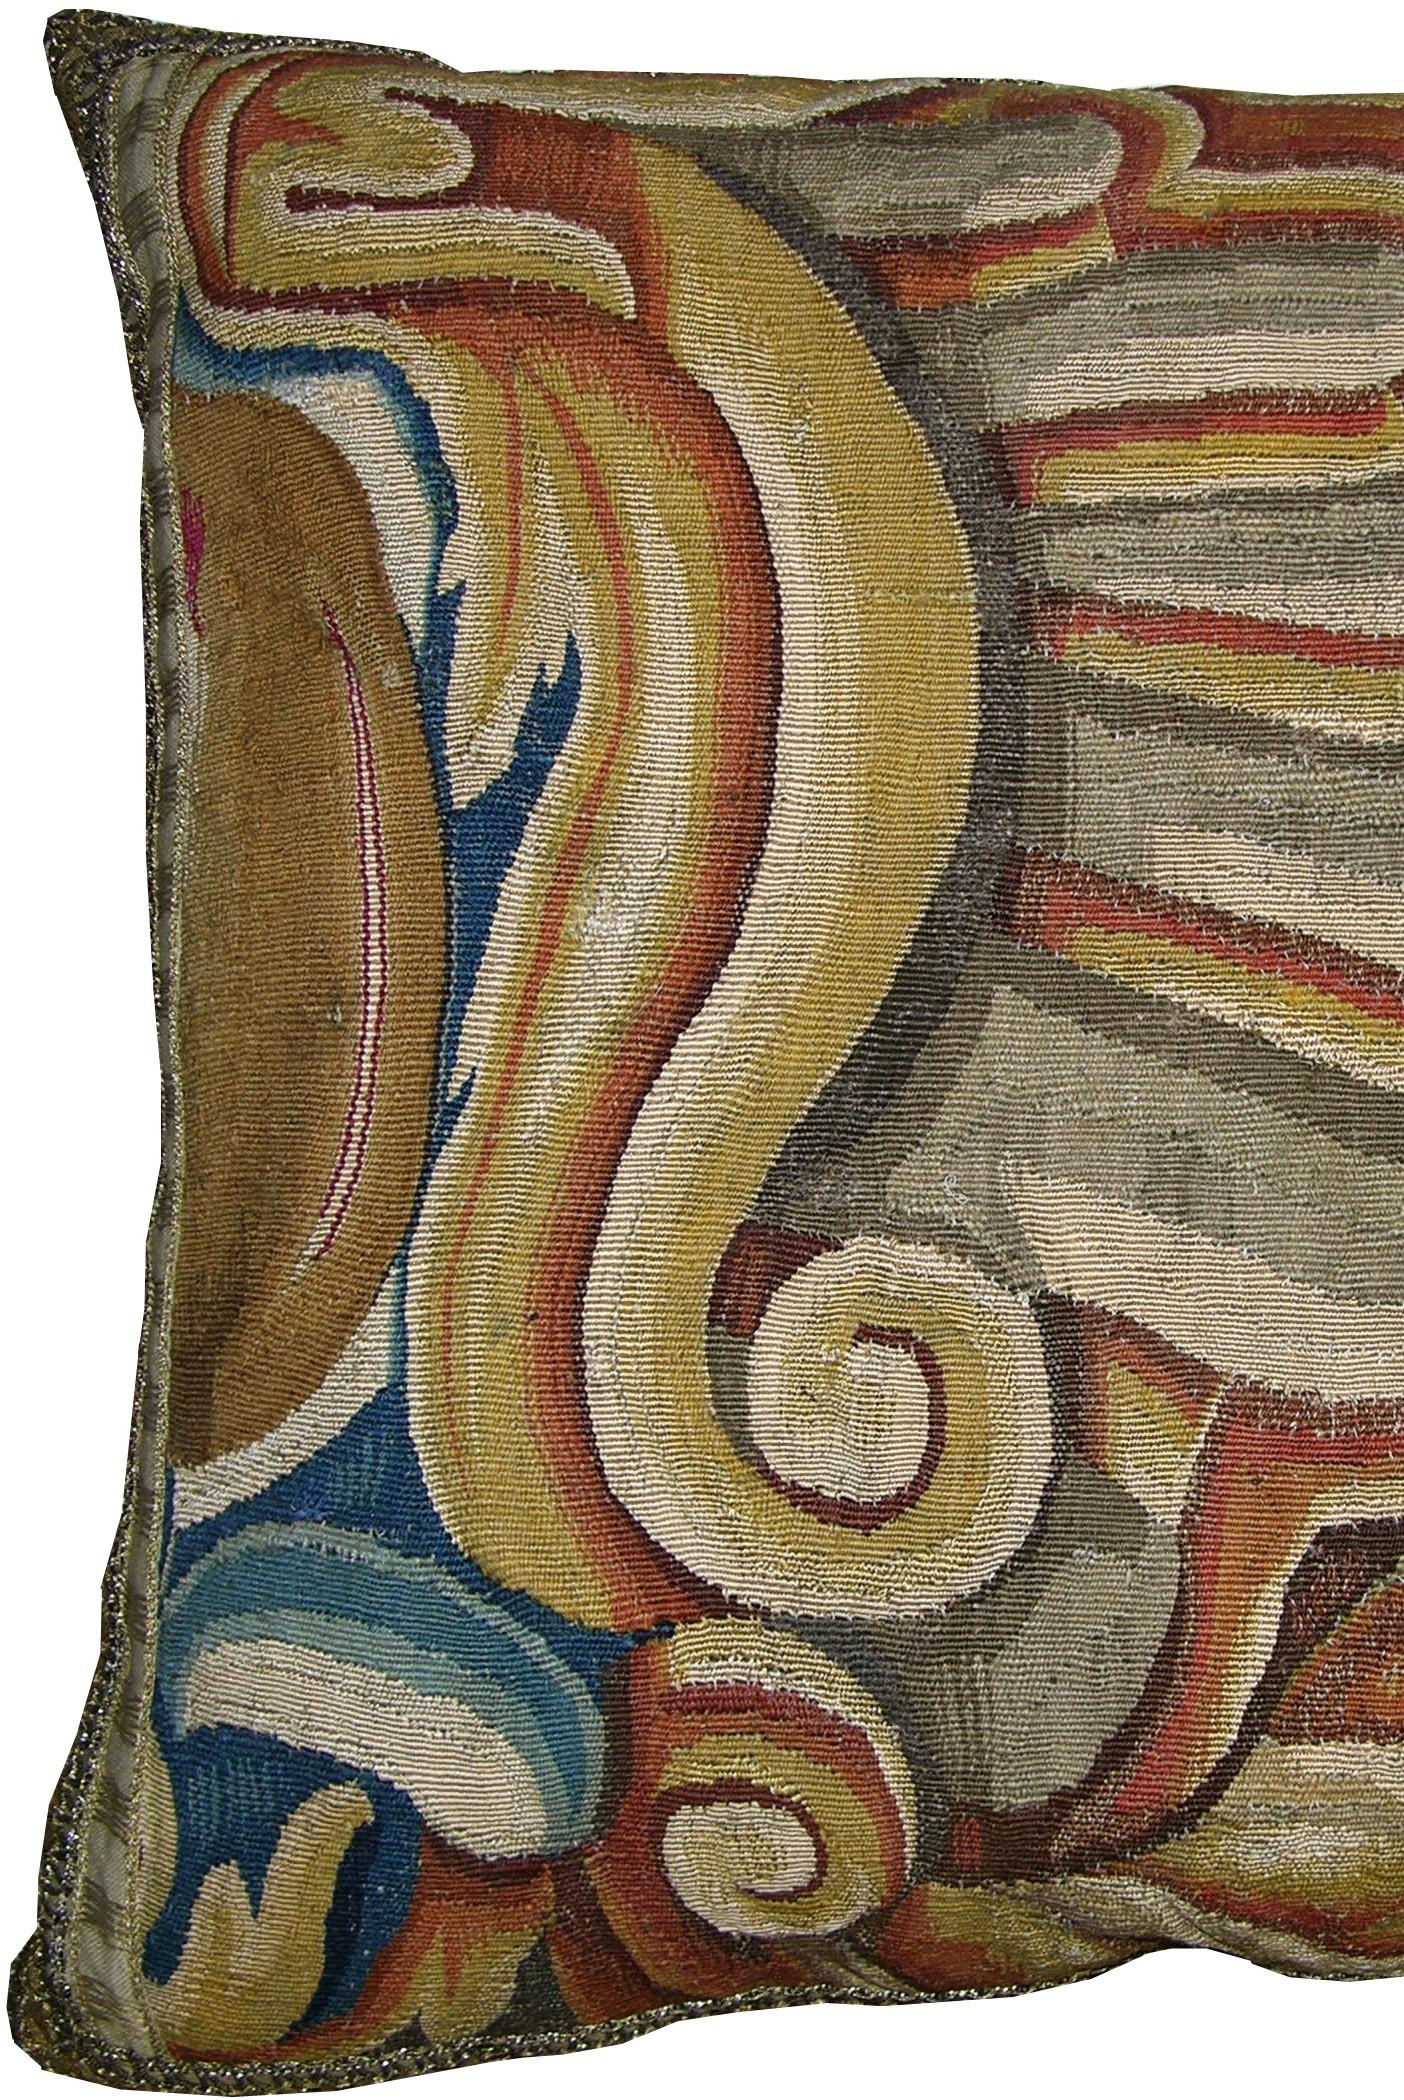 Ca.1700 Antique Brussels Tapestry Pillow - 21'' X 19'', Handmade and Needlework, Extremely Fine and Unique